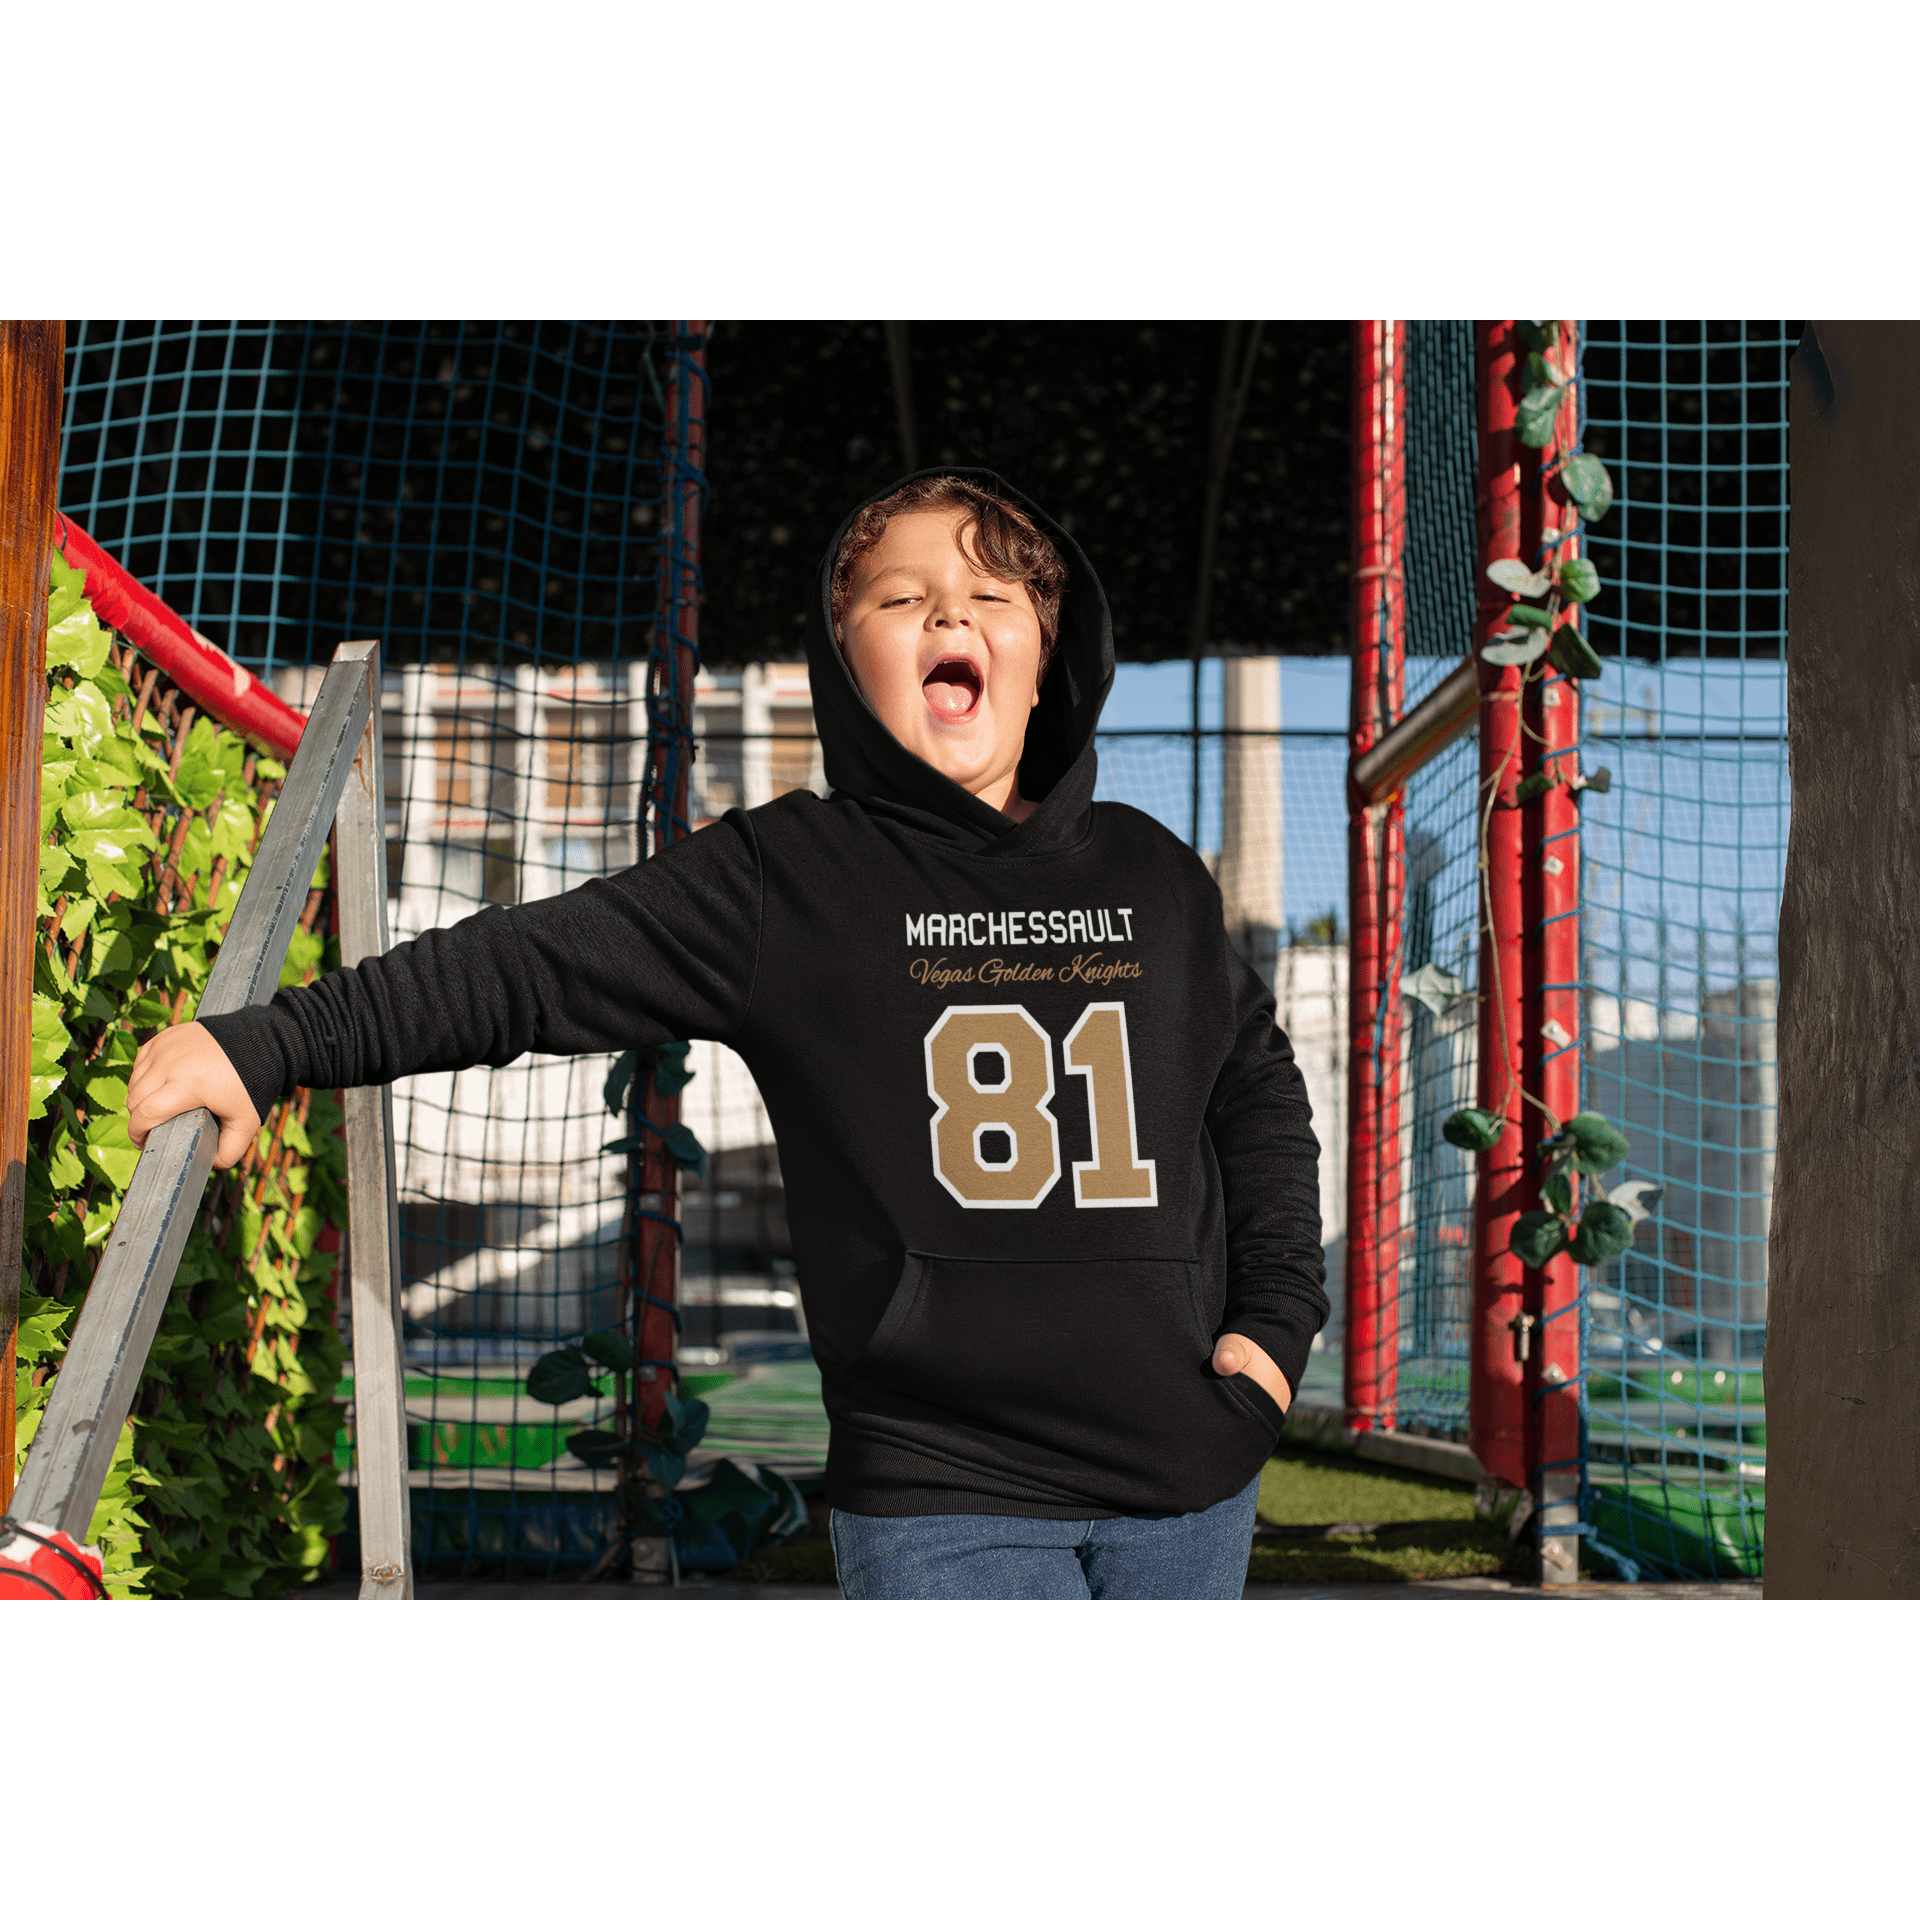 Kids clothes Marchessault 81 Vegas Golden Knights Youth Hooded Sweatshirt